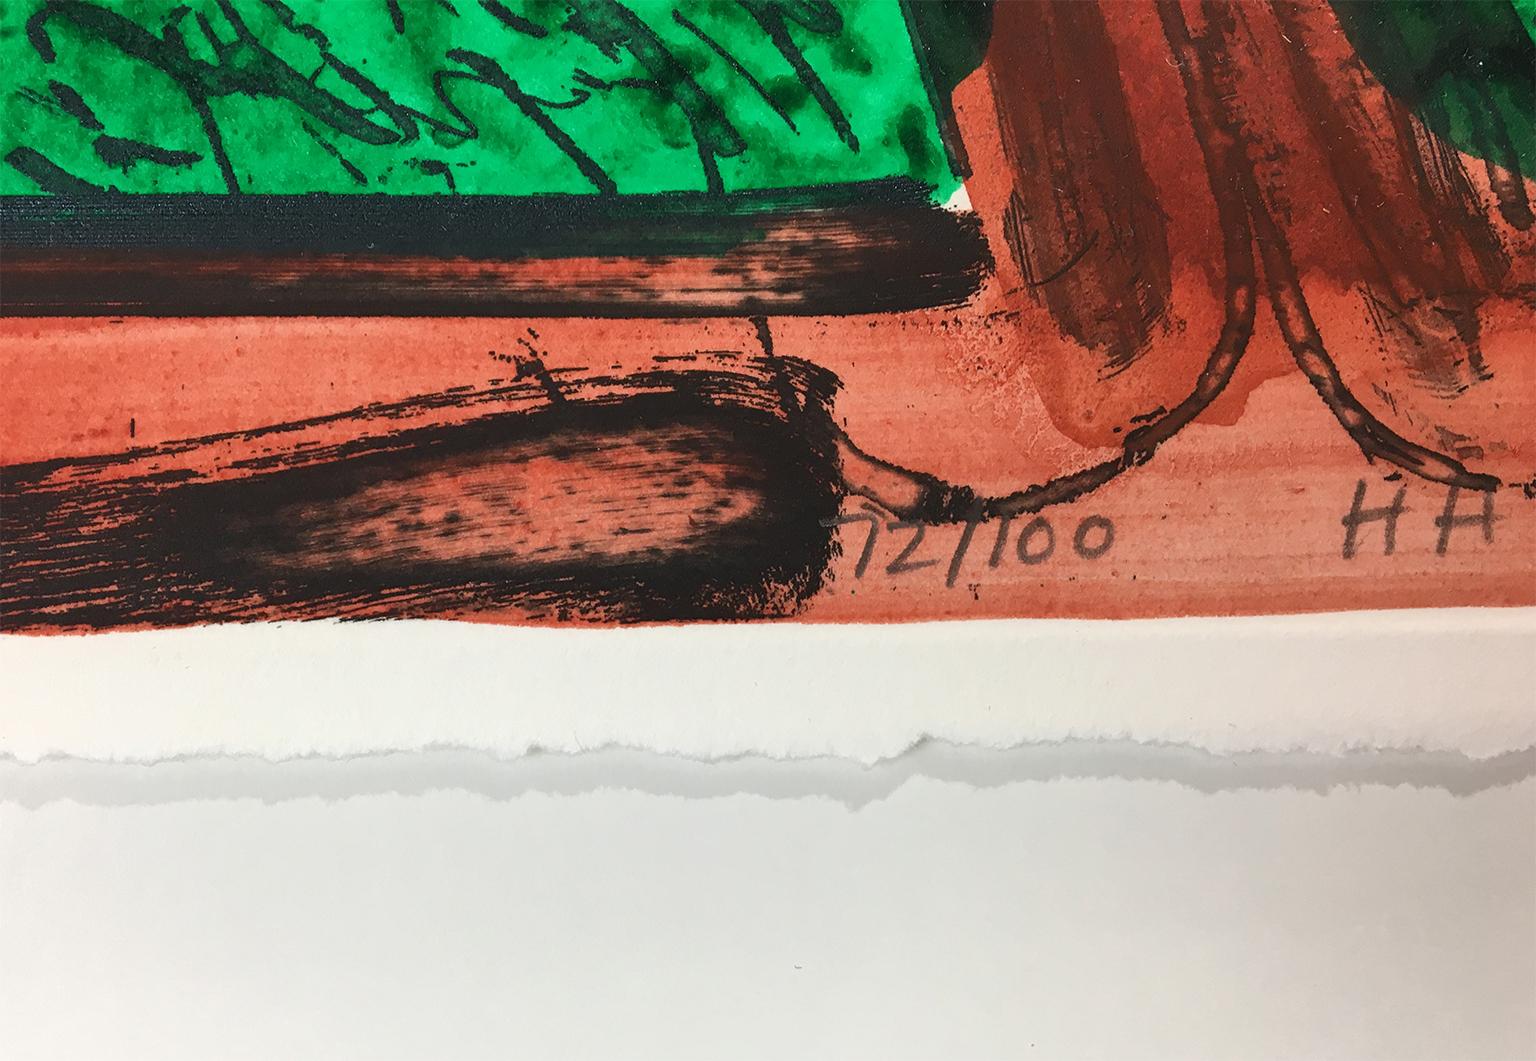 DH in Hollywood etching watercolour pastel DH=David Hockney - Abstract Print by Howard Hodgkin